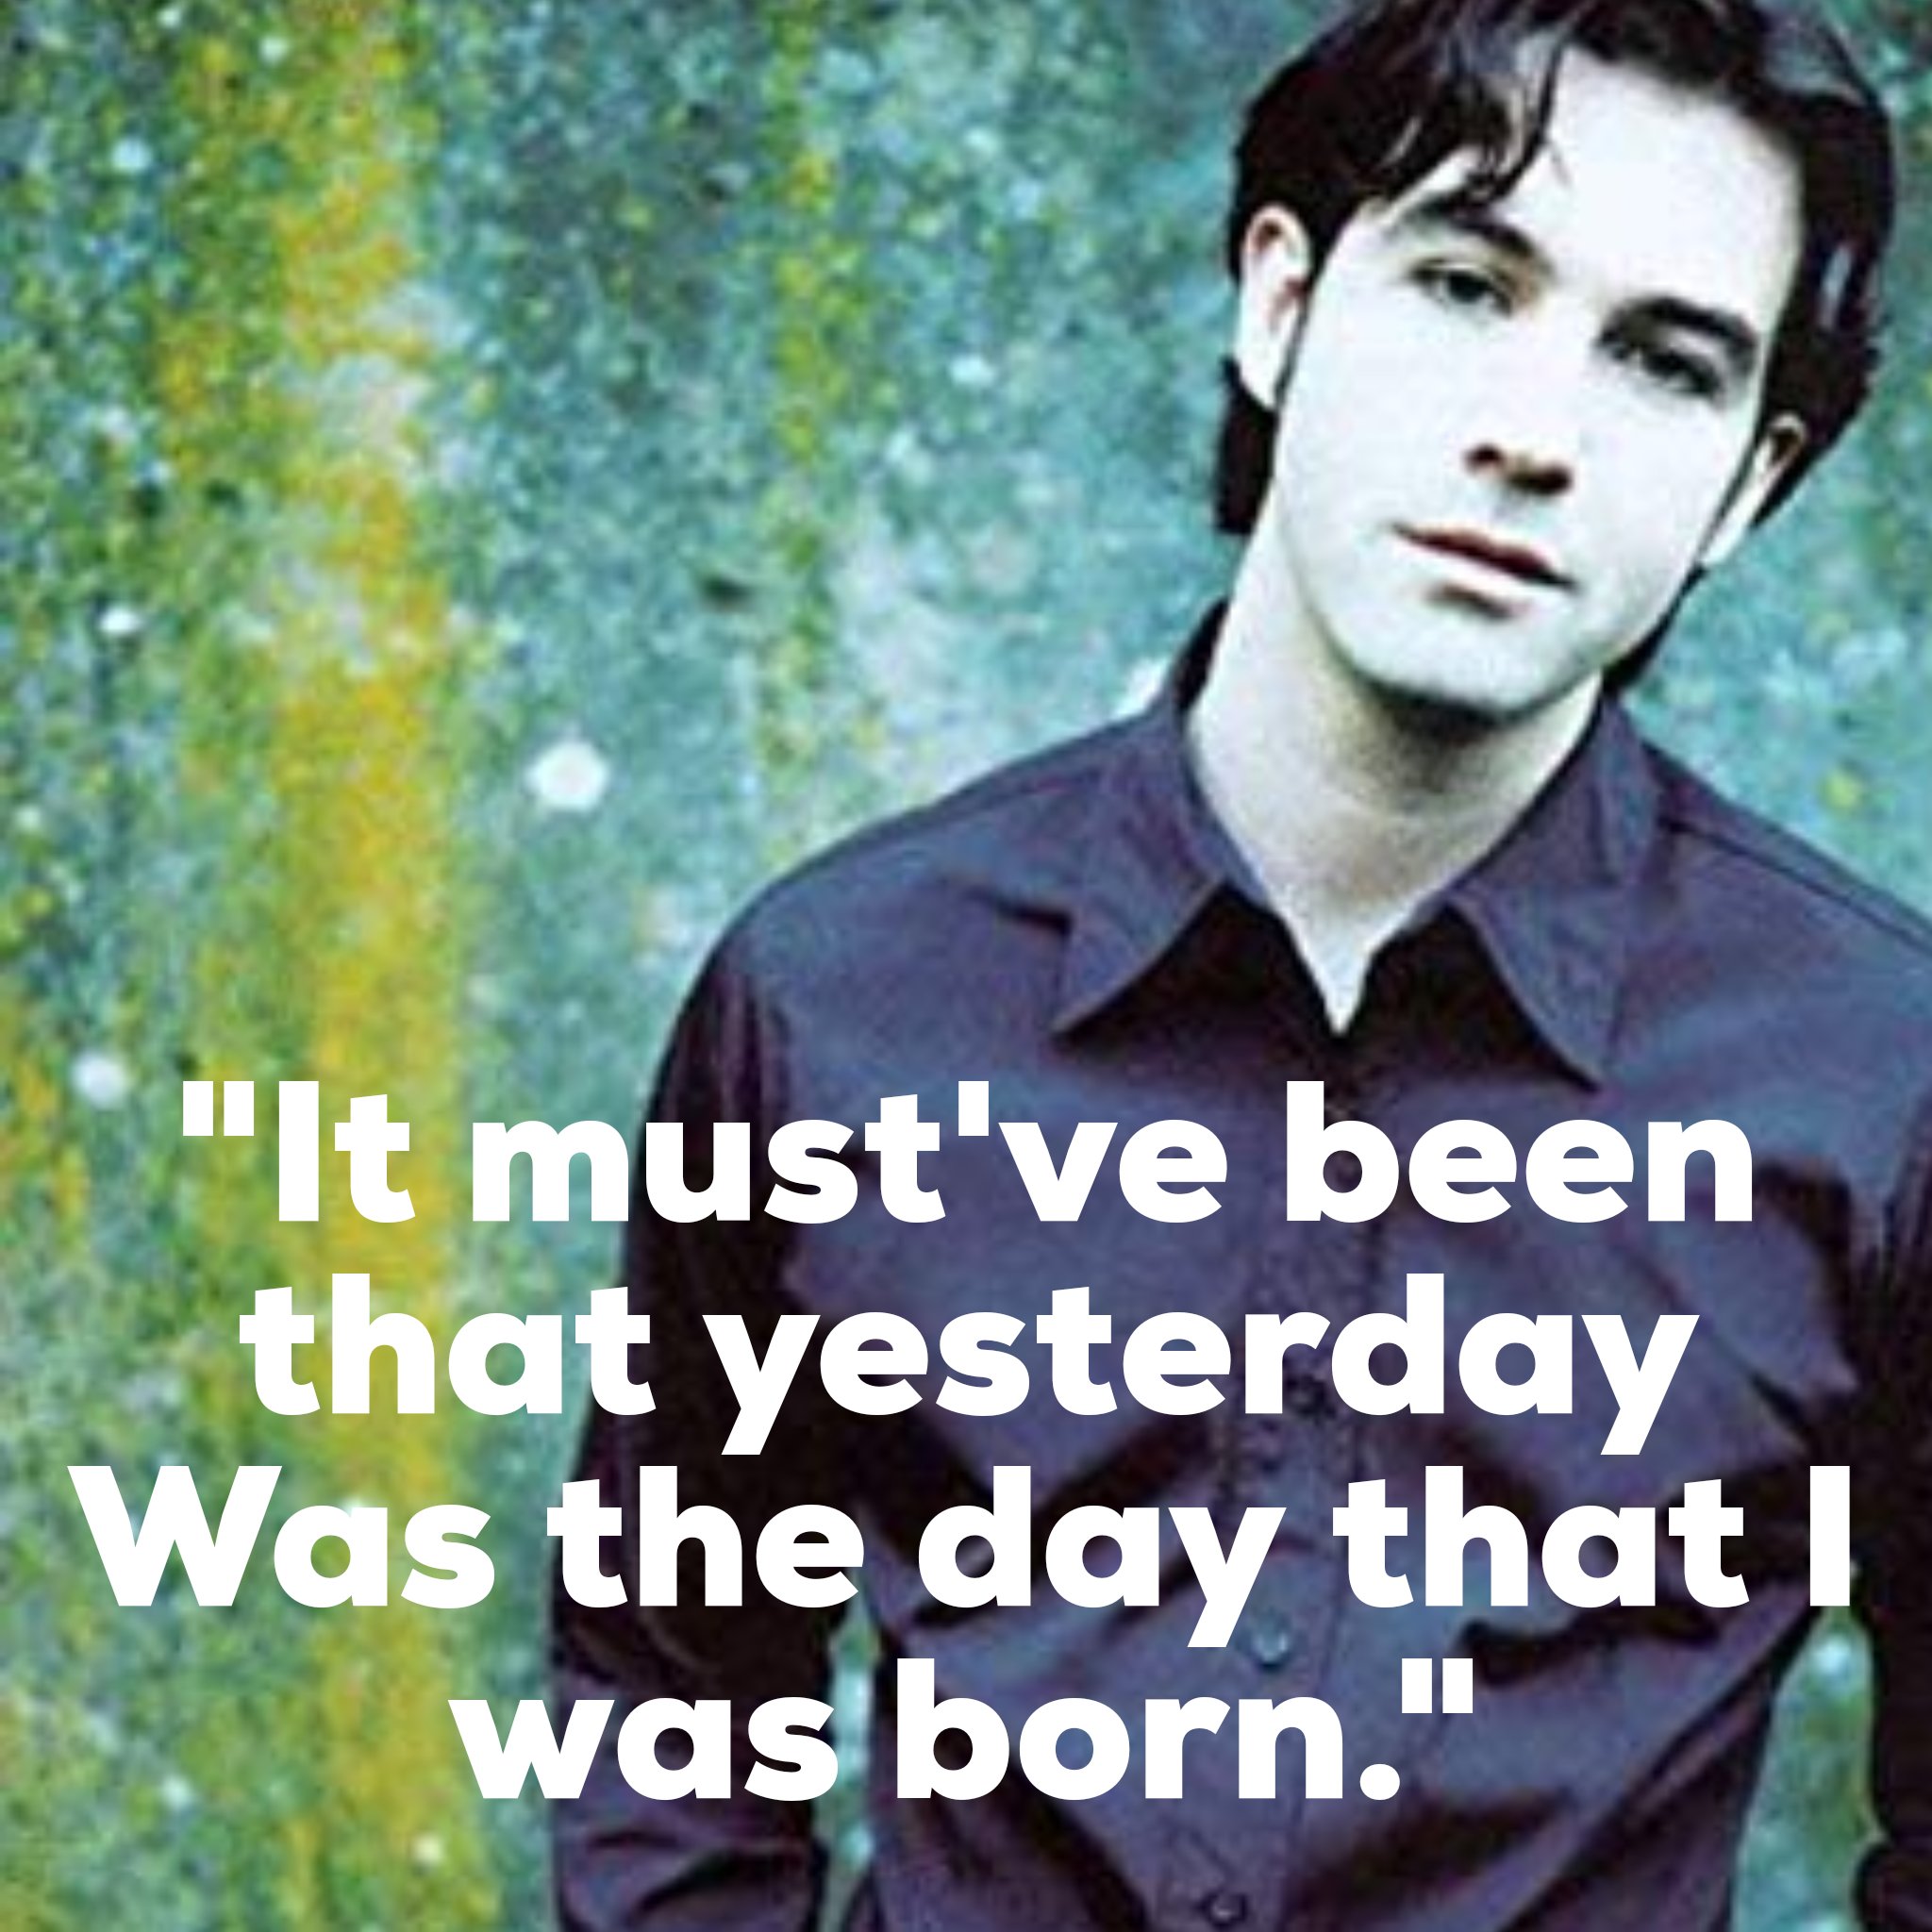 Seeing how yesterday was birthday, Happy Duncan Sheik Day!   